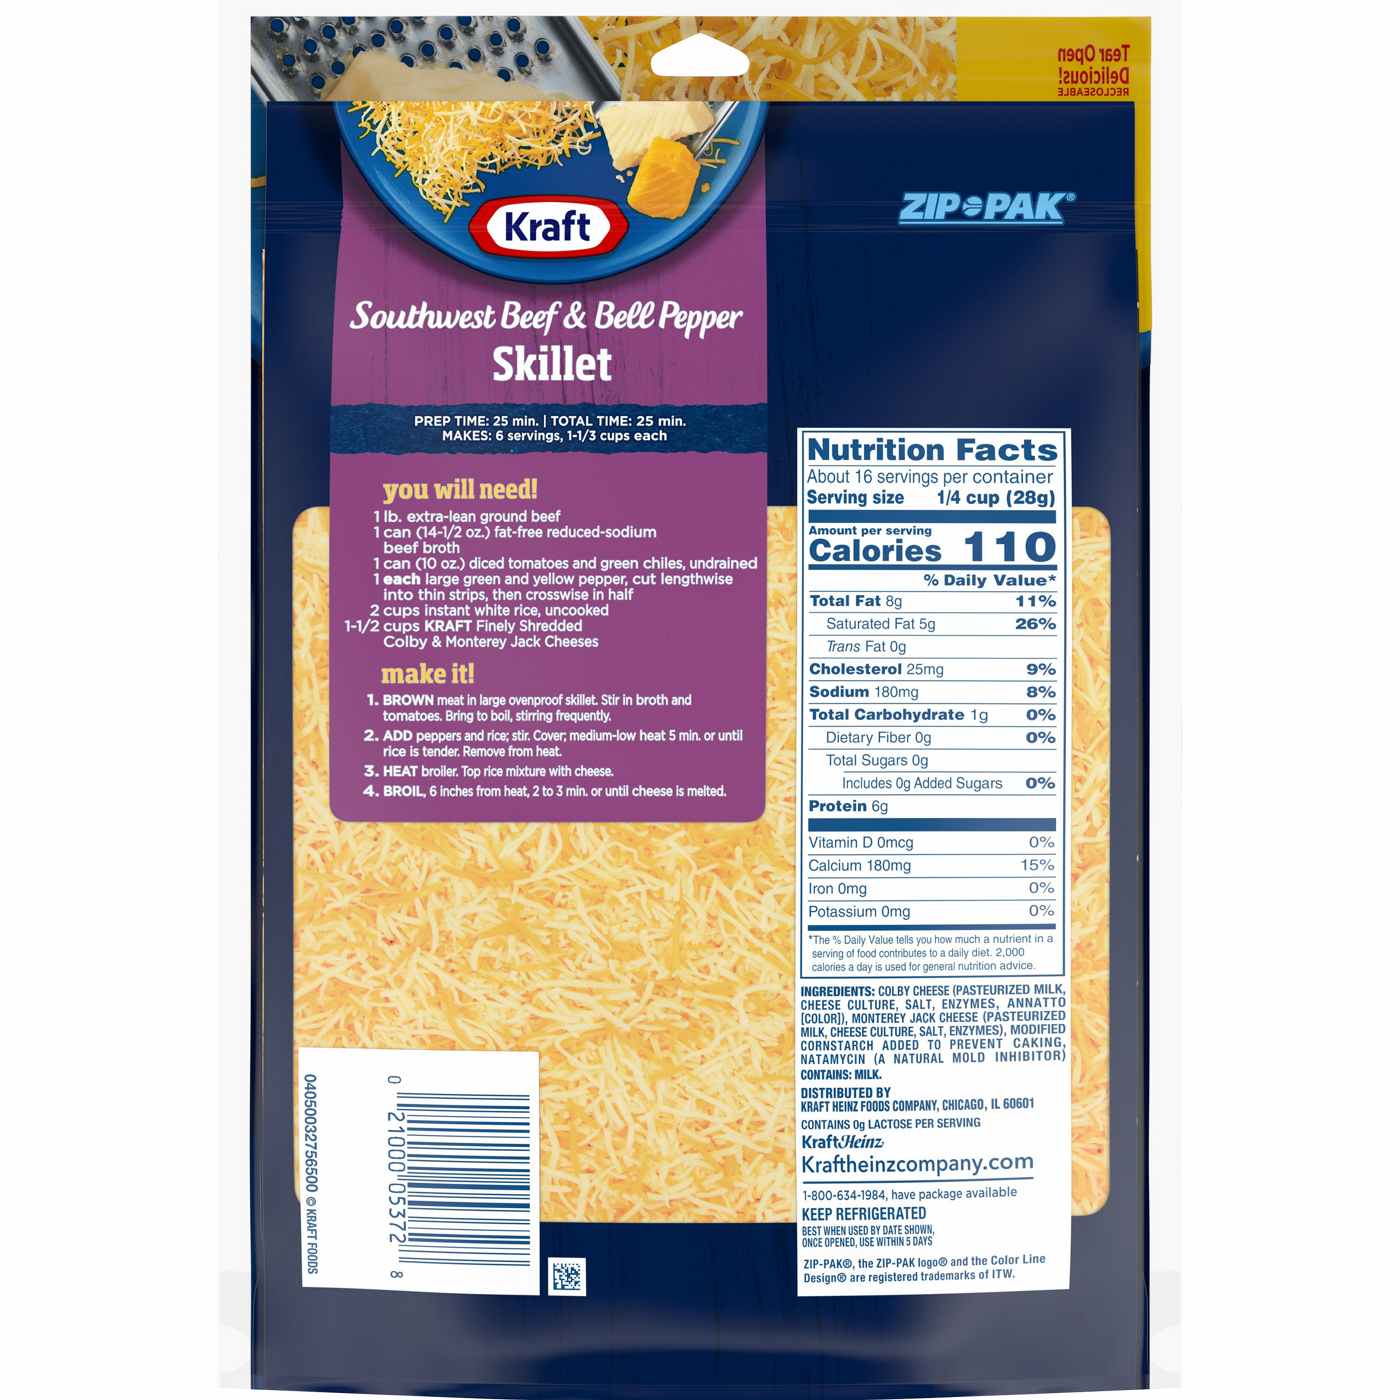 Kraft Colby & Monterey Jack Finely Shredded Cheese; image 3 of 4